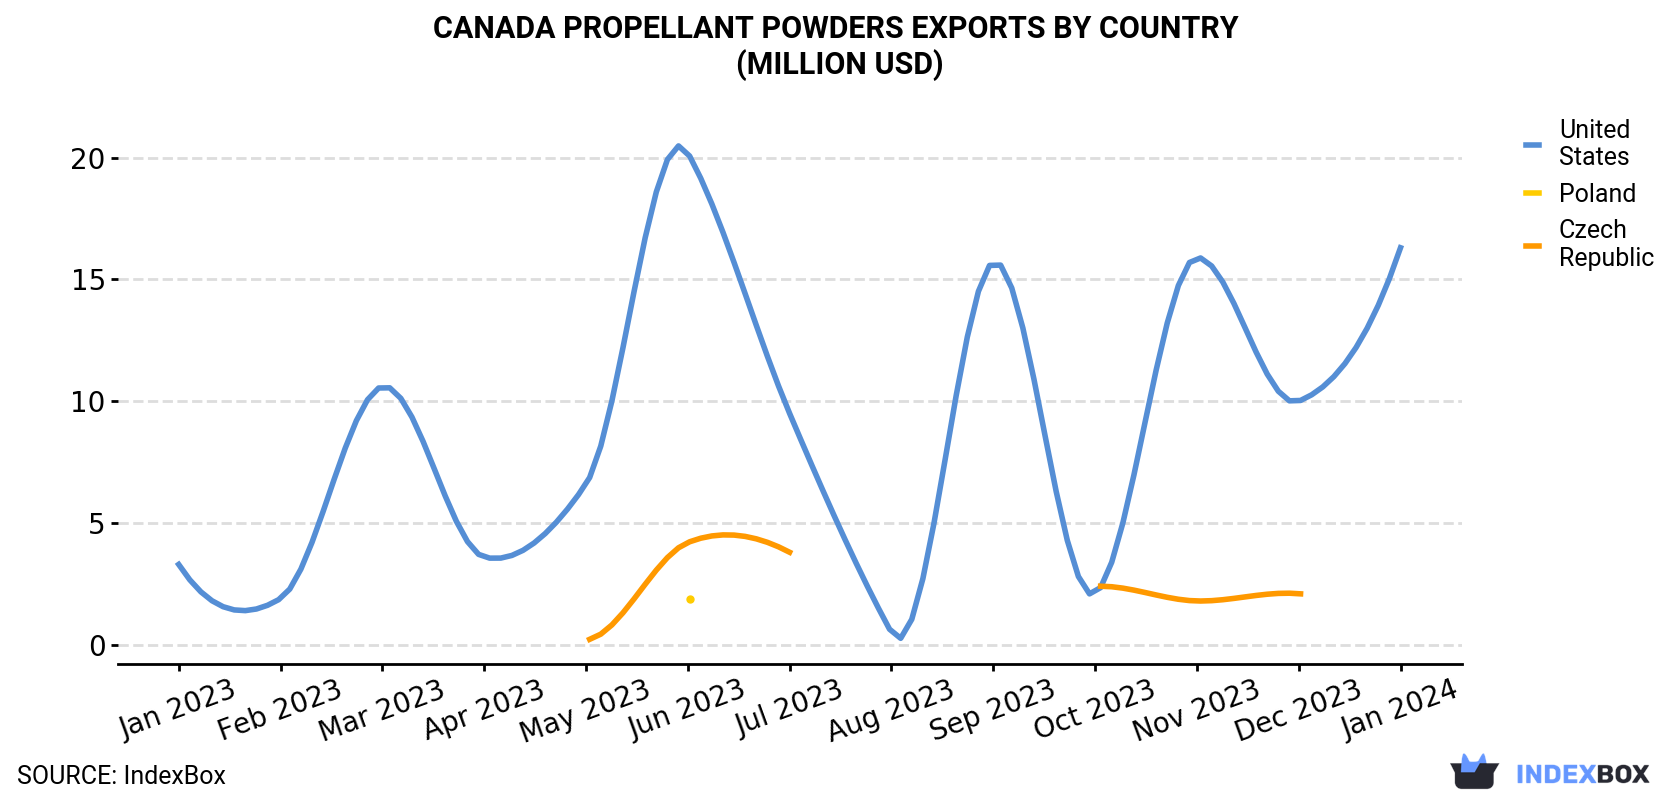 Canada Propellant Powders Exports By Country (Million USD)